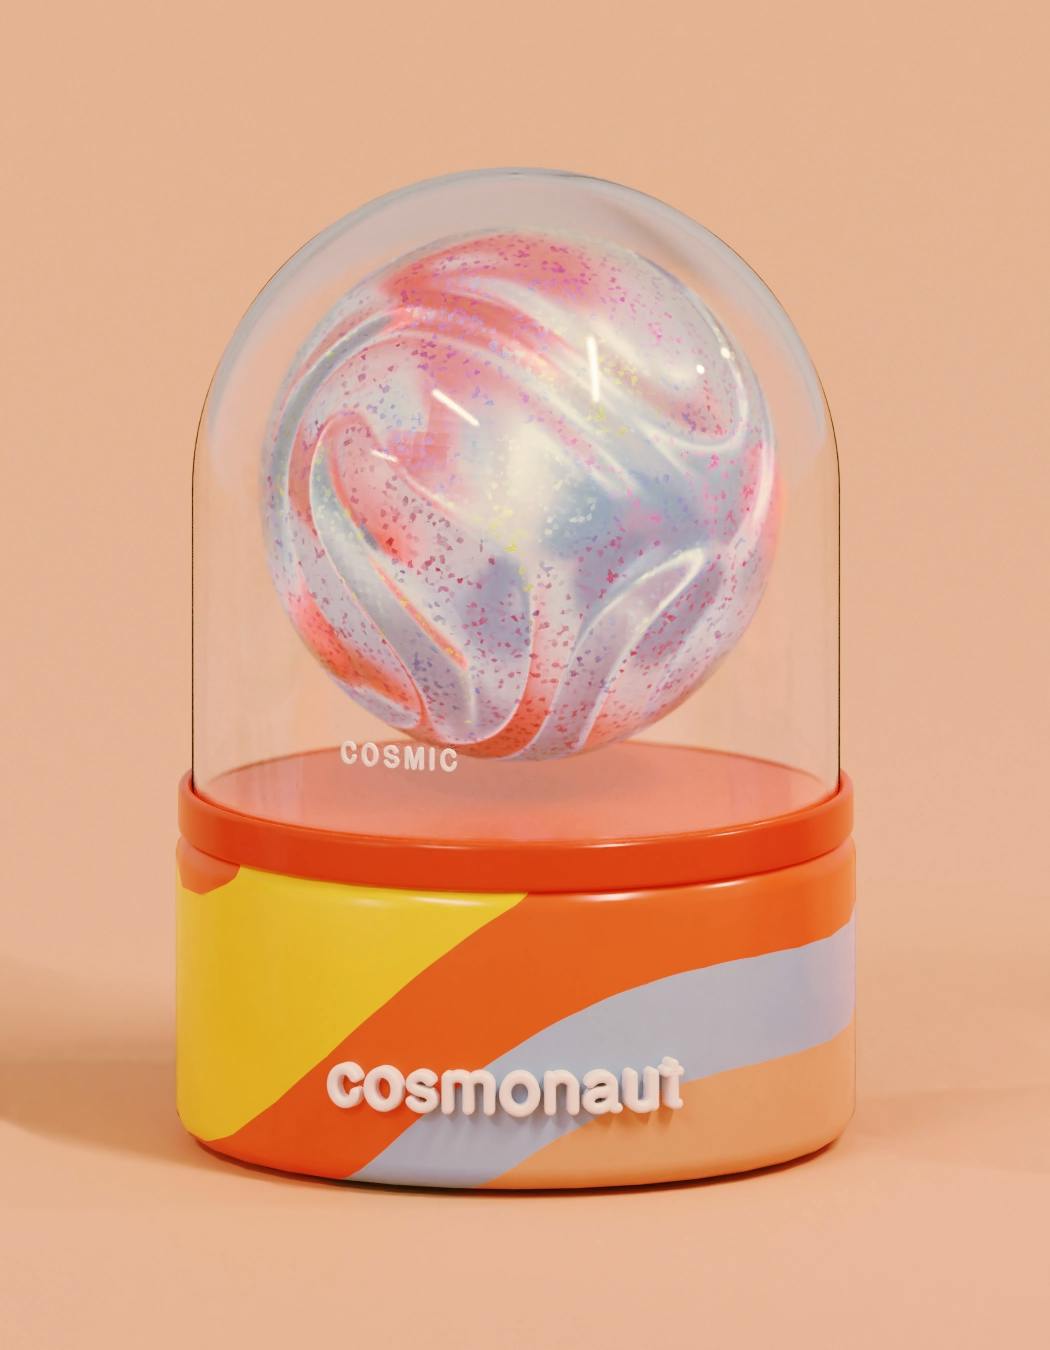 a spherical jawbreaker candy floats in its capsule, featuring a metallic surface with wavy grooves all around. the label reads 'cosmic'.